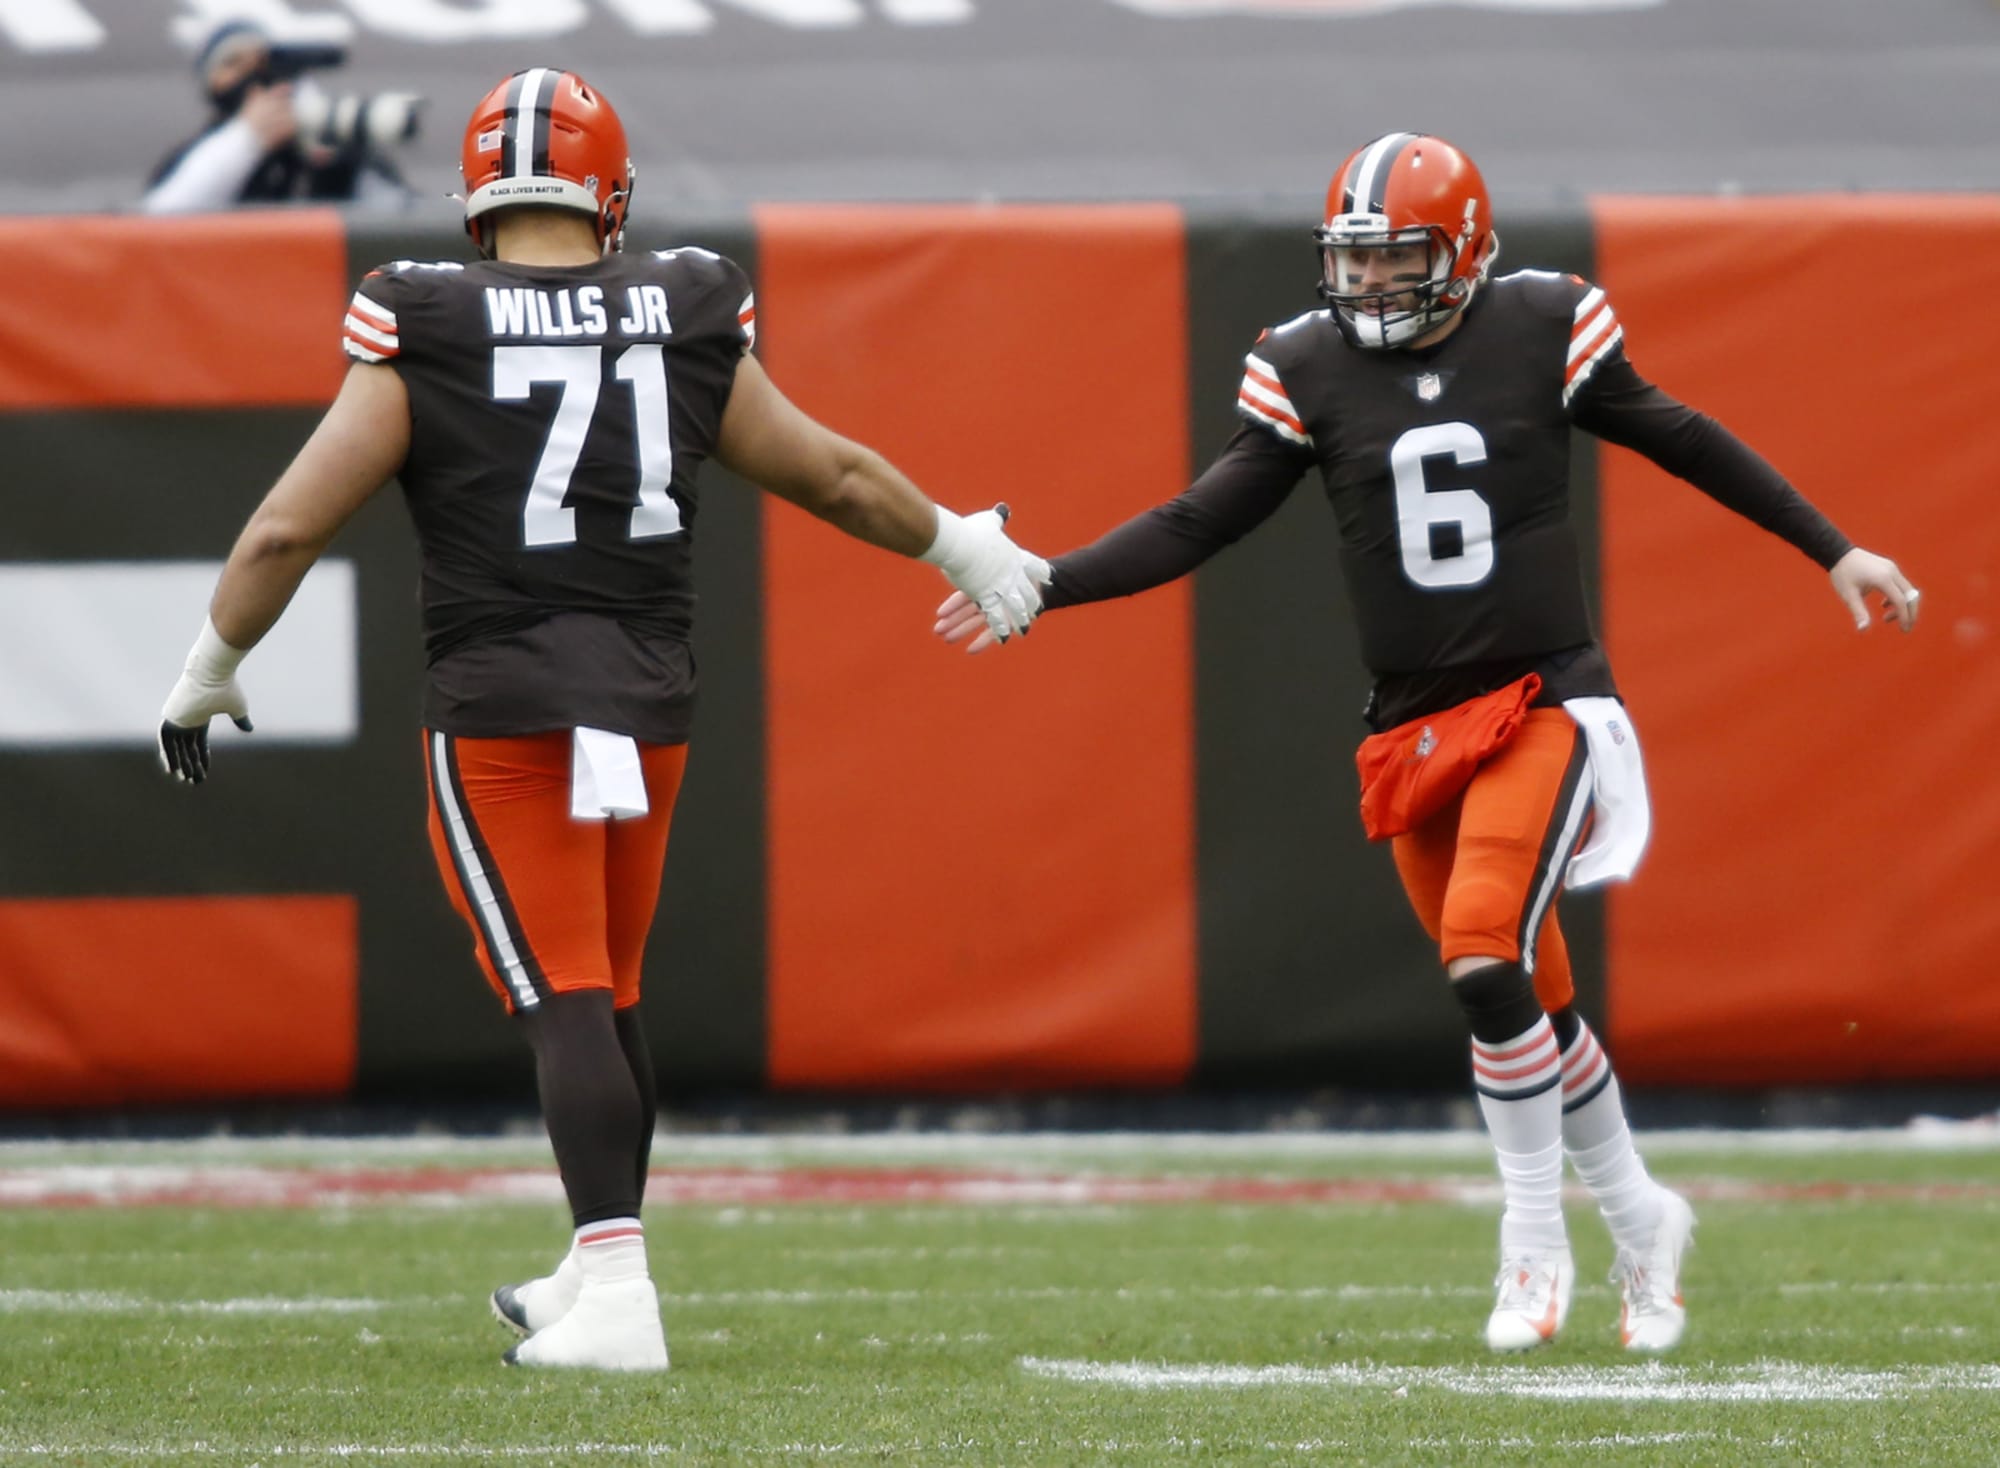 The key to defeating the Ravens will be the Browns offensive line